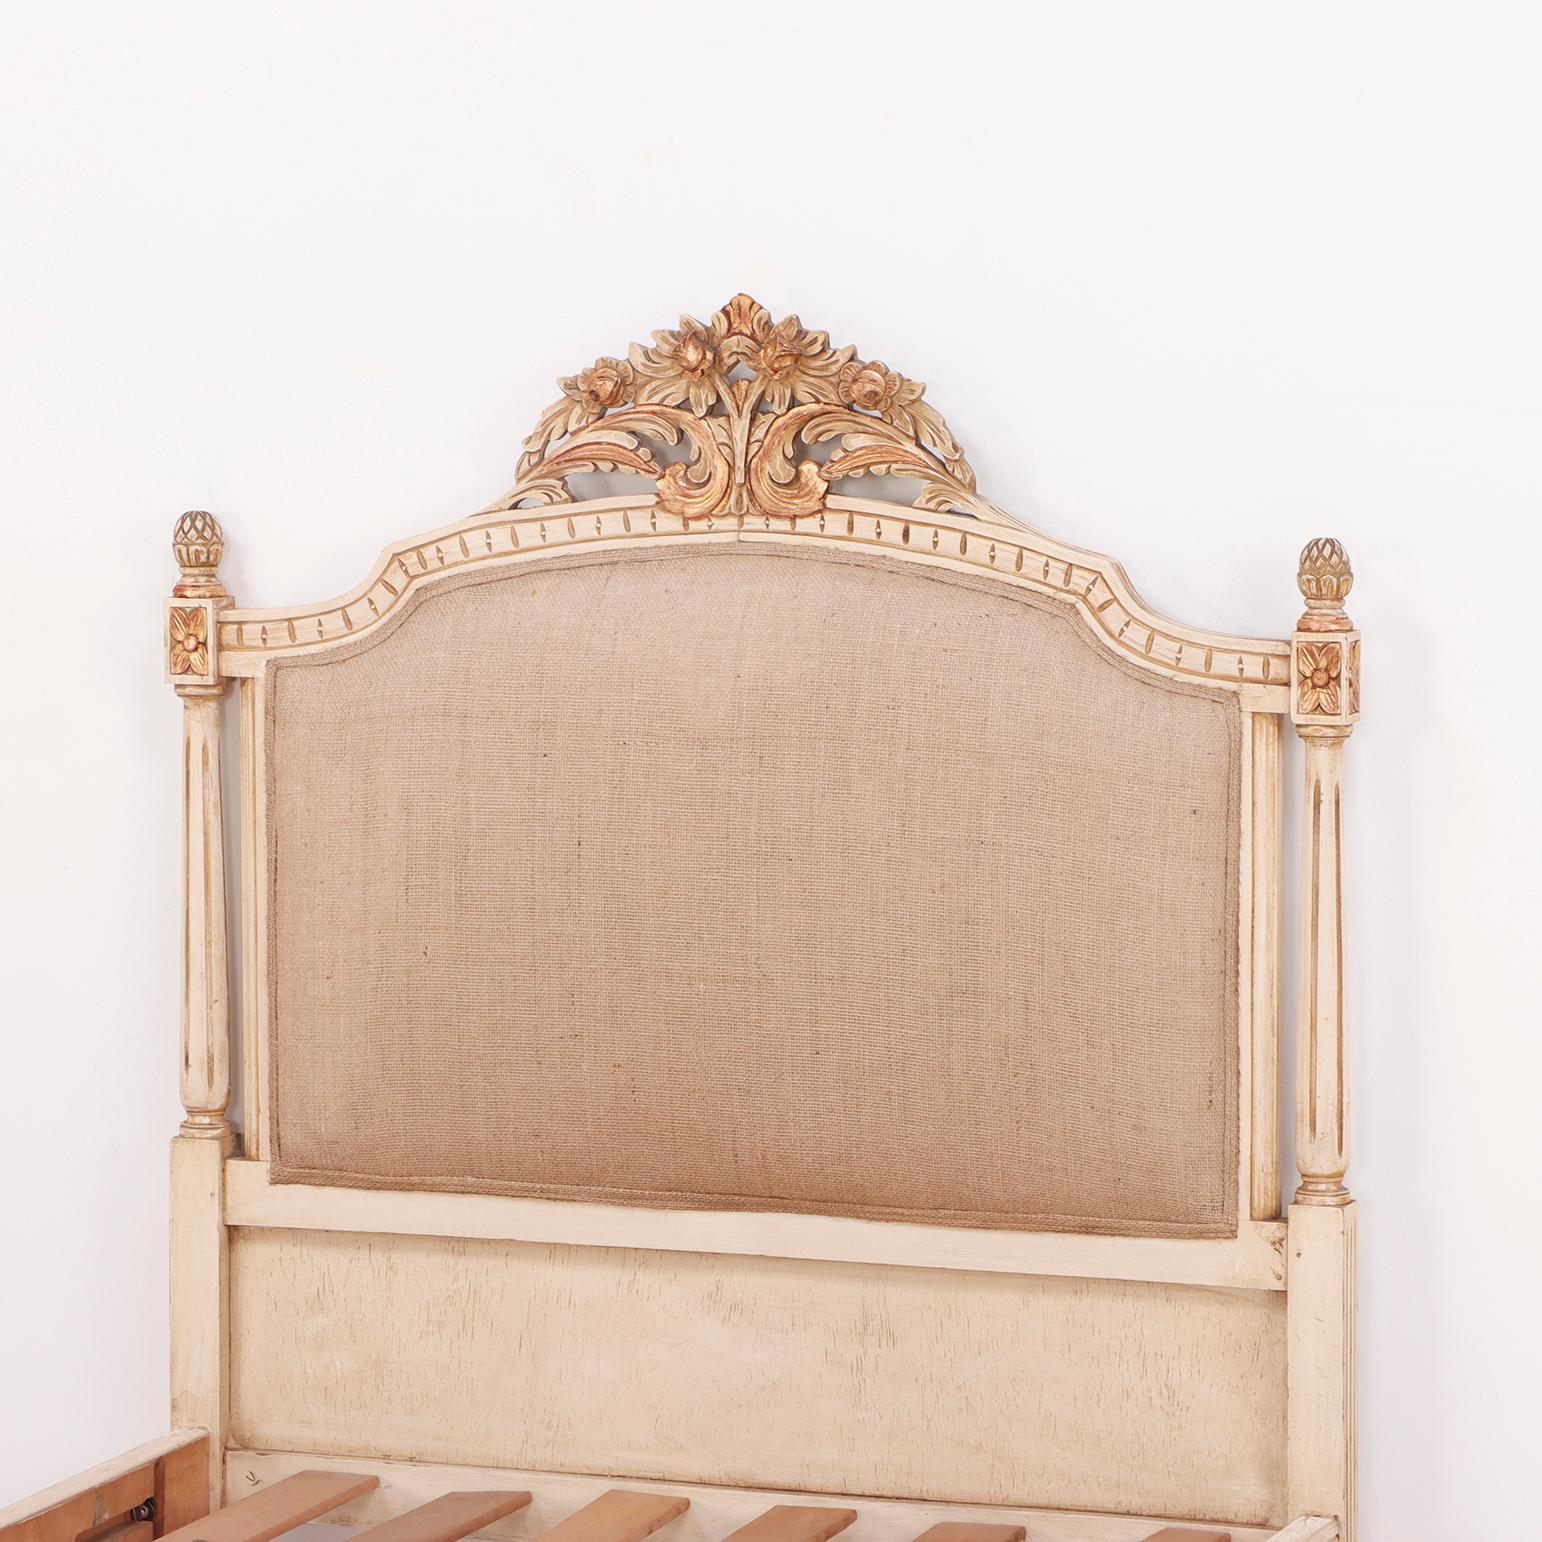 Painted, carved and gilt Louis XVI style twin size beds C 1950. Both the head and the footboards having carved crests. Interior Dimensions: 36.5